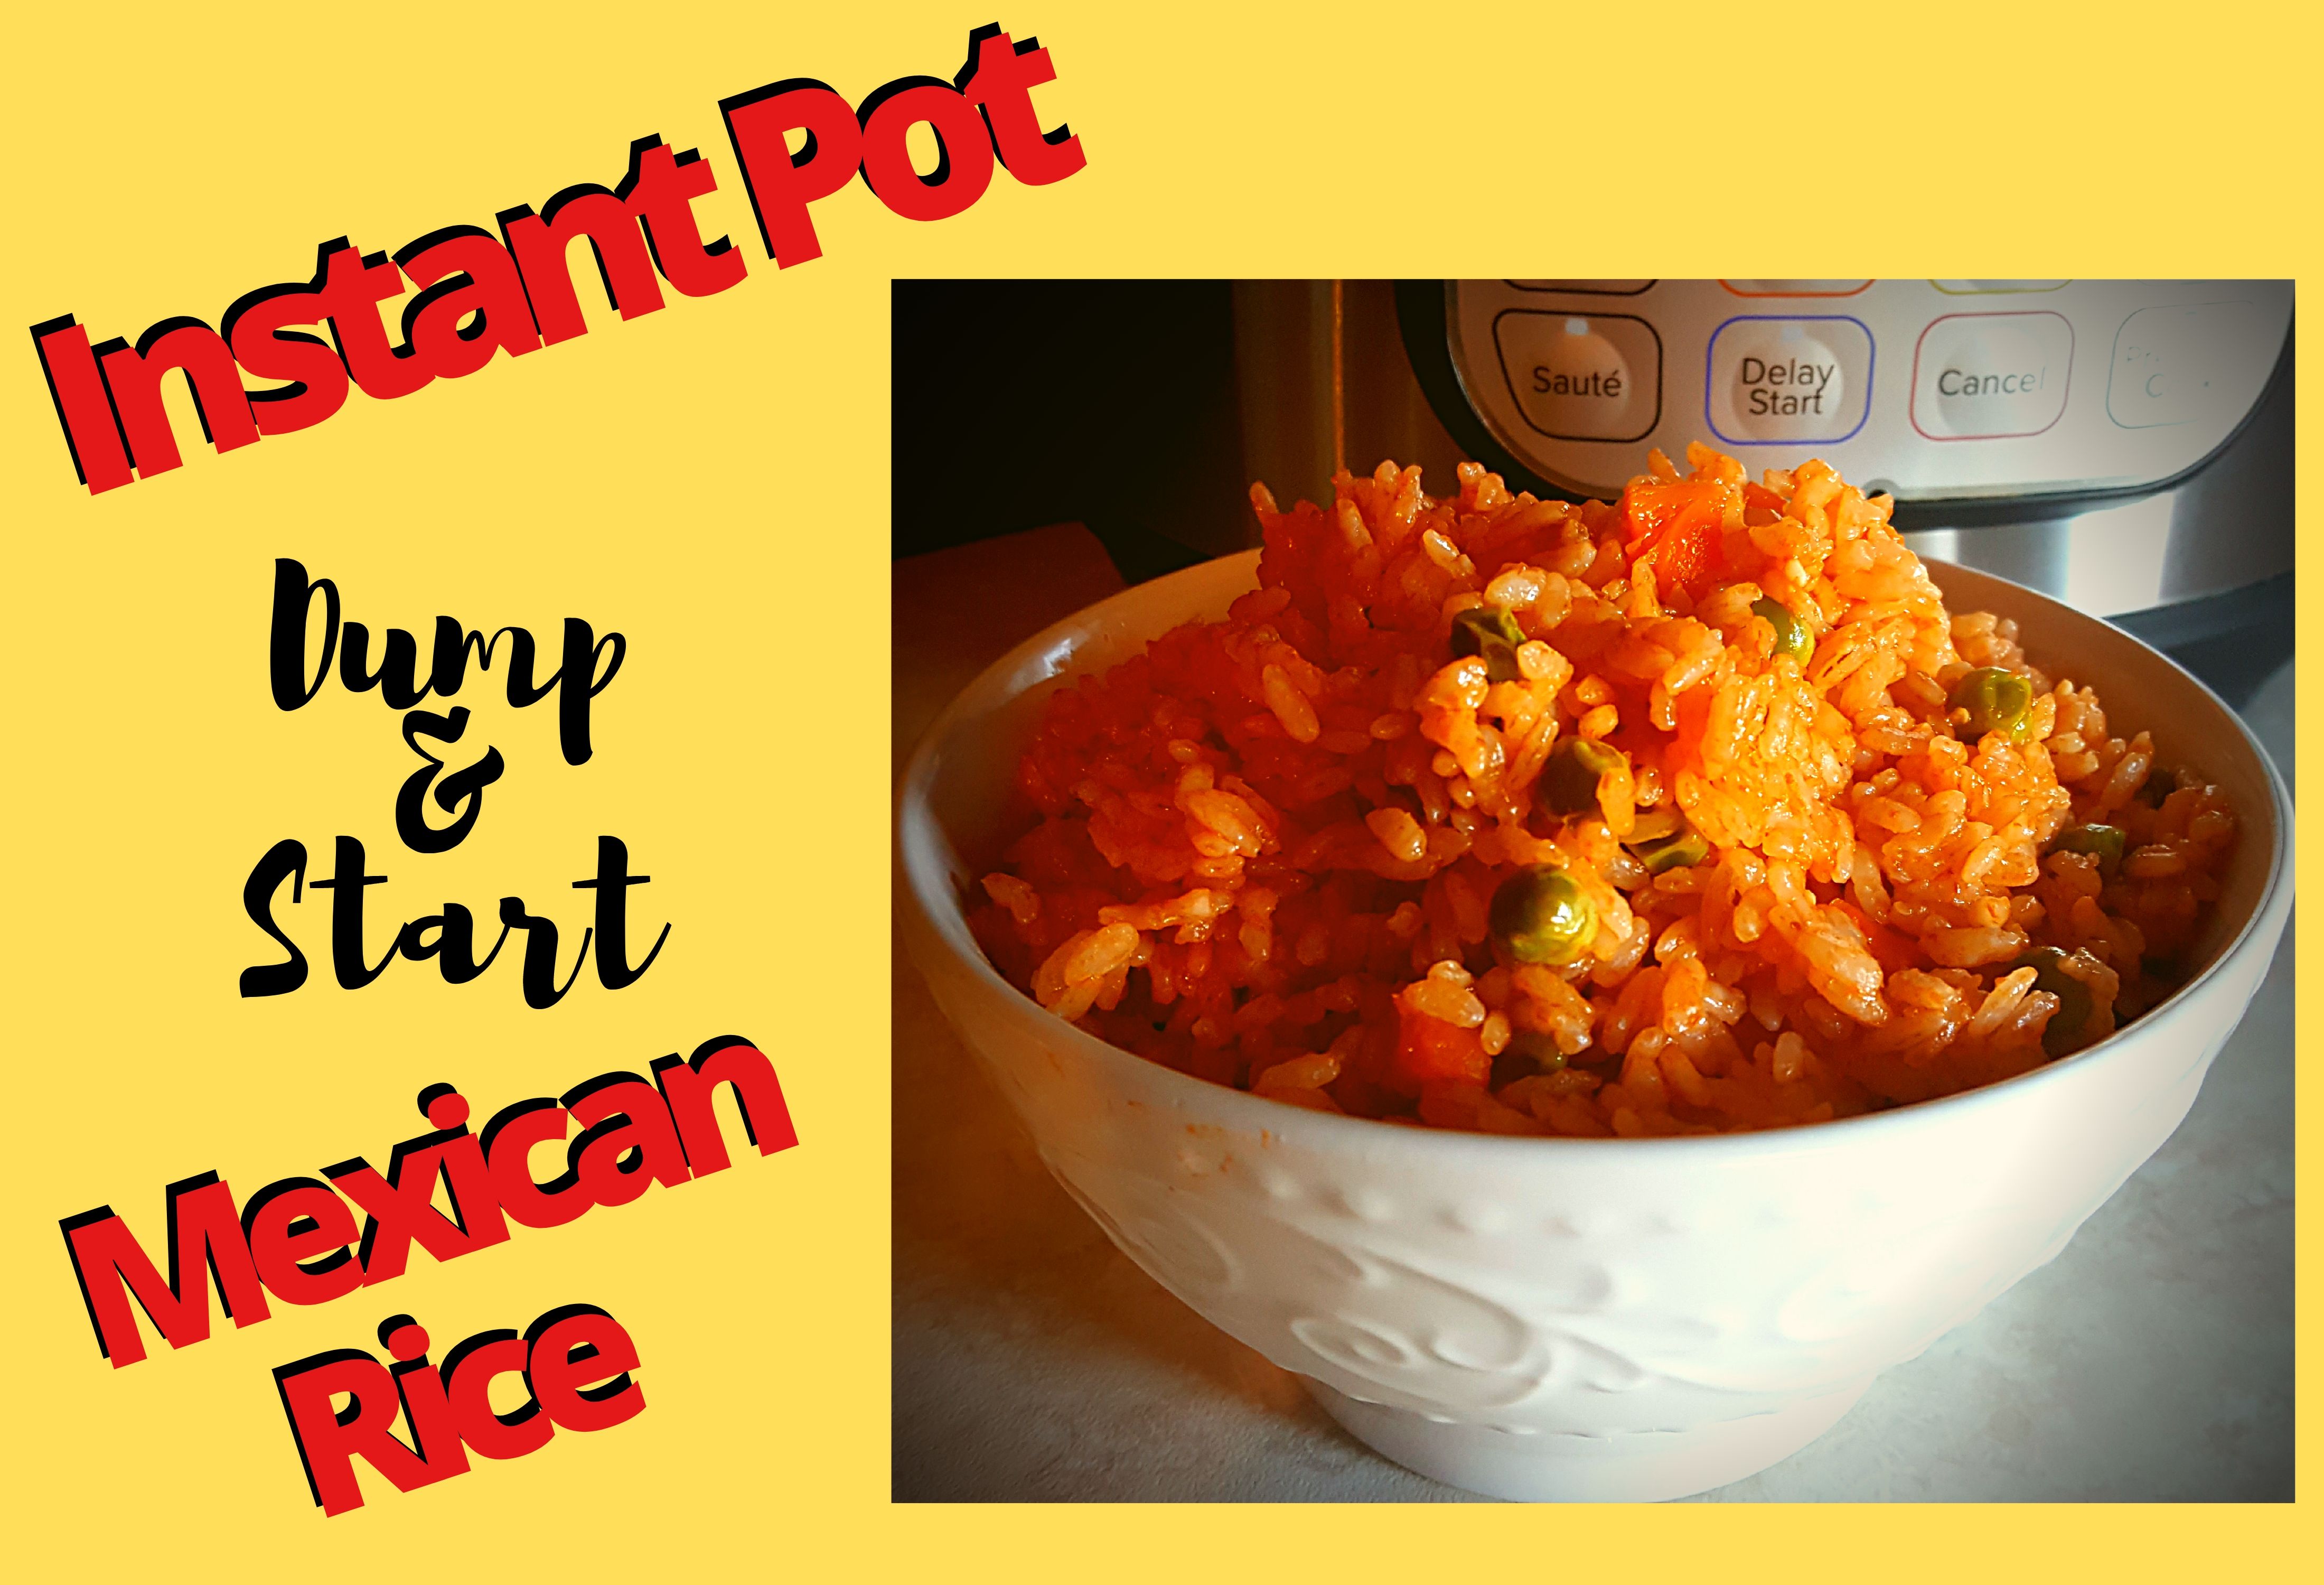 A white bowl filled with mexican rice with peas and carrots sitting in front of an Instant Pot.